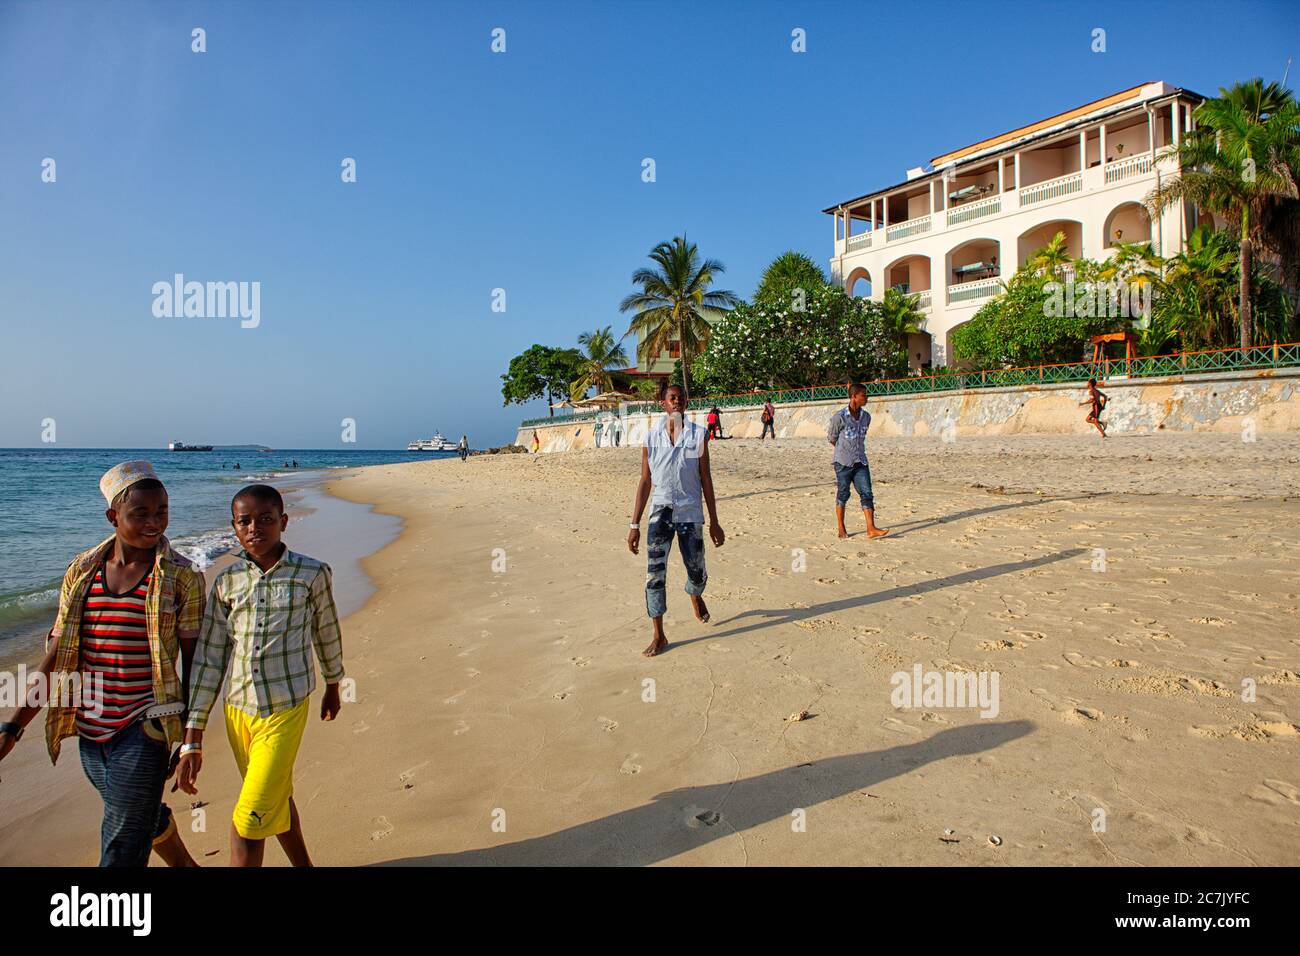 Indian Ocean and Stone Town in Zanzibar, Tansania, East Africa, Citizens walking on the beach Stock Photo